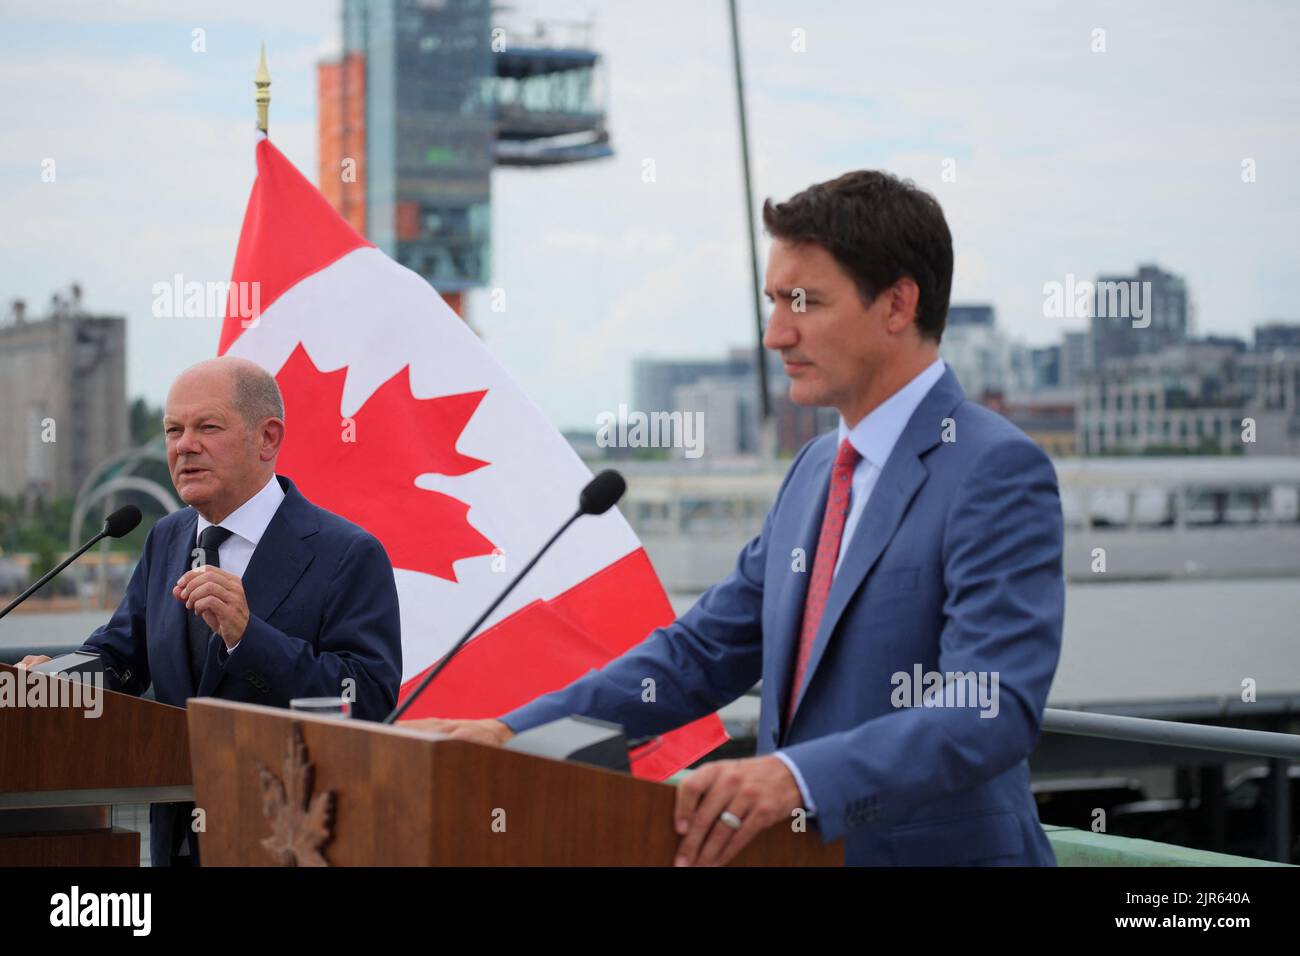 Germany's Chancellor Olaf Scholz and Canada's Prime Minister Justin Trudeau speak to the media outside the Montreal Science Centre, in Montreal, Quebec, Canada August 22, 2022. REUTERS/Christinne Muschi Stock Photo